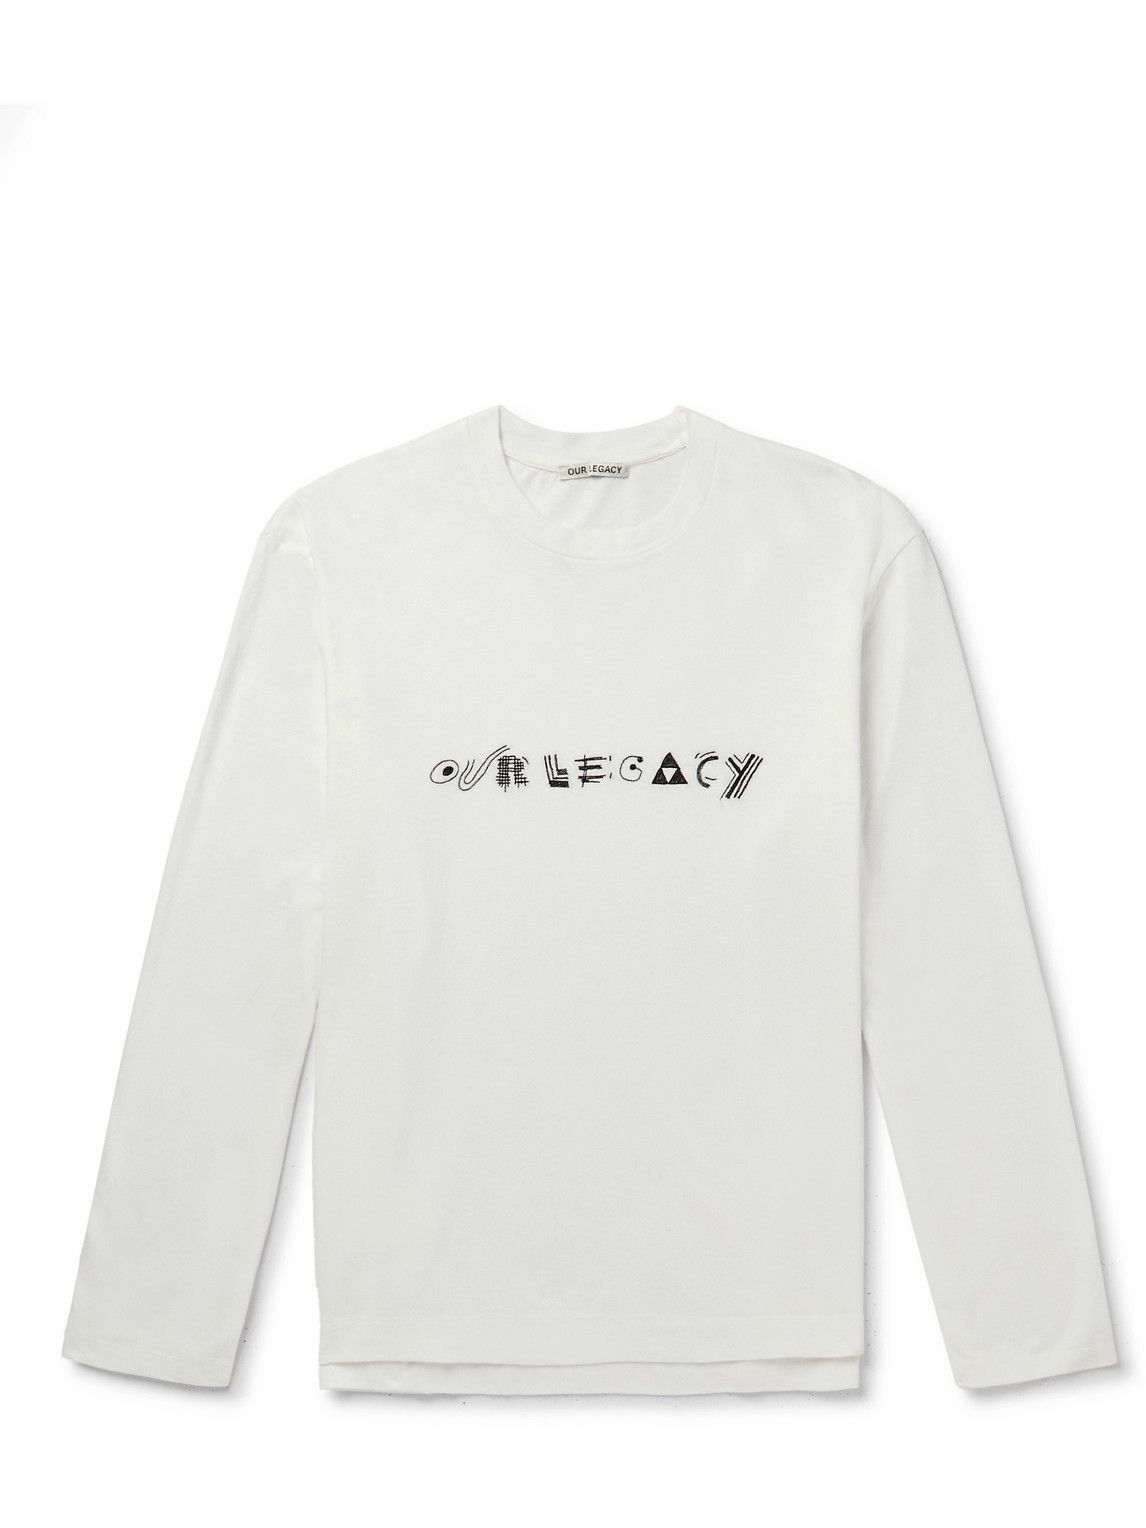 Our Legacy - Logo-Embroidered Cotton-Jersey T-Shirt - White Our Legacy